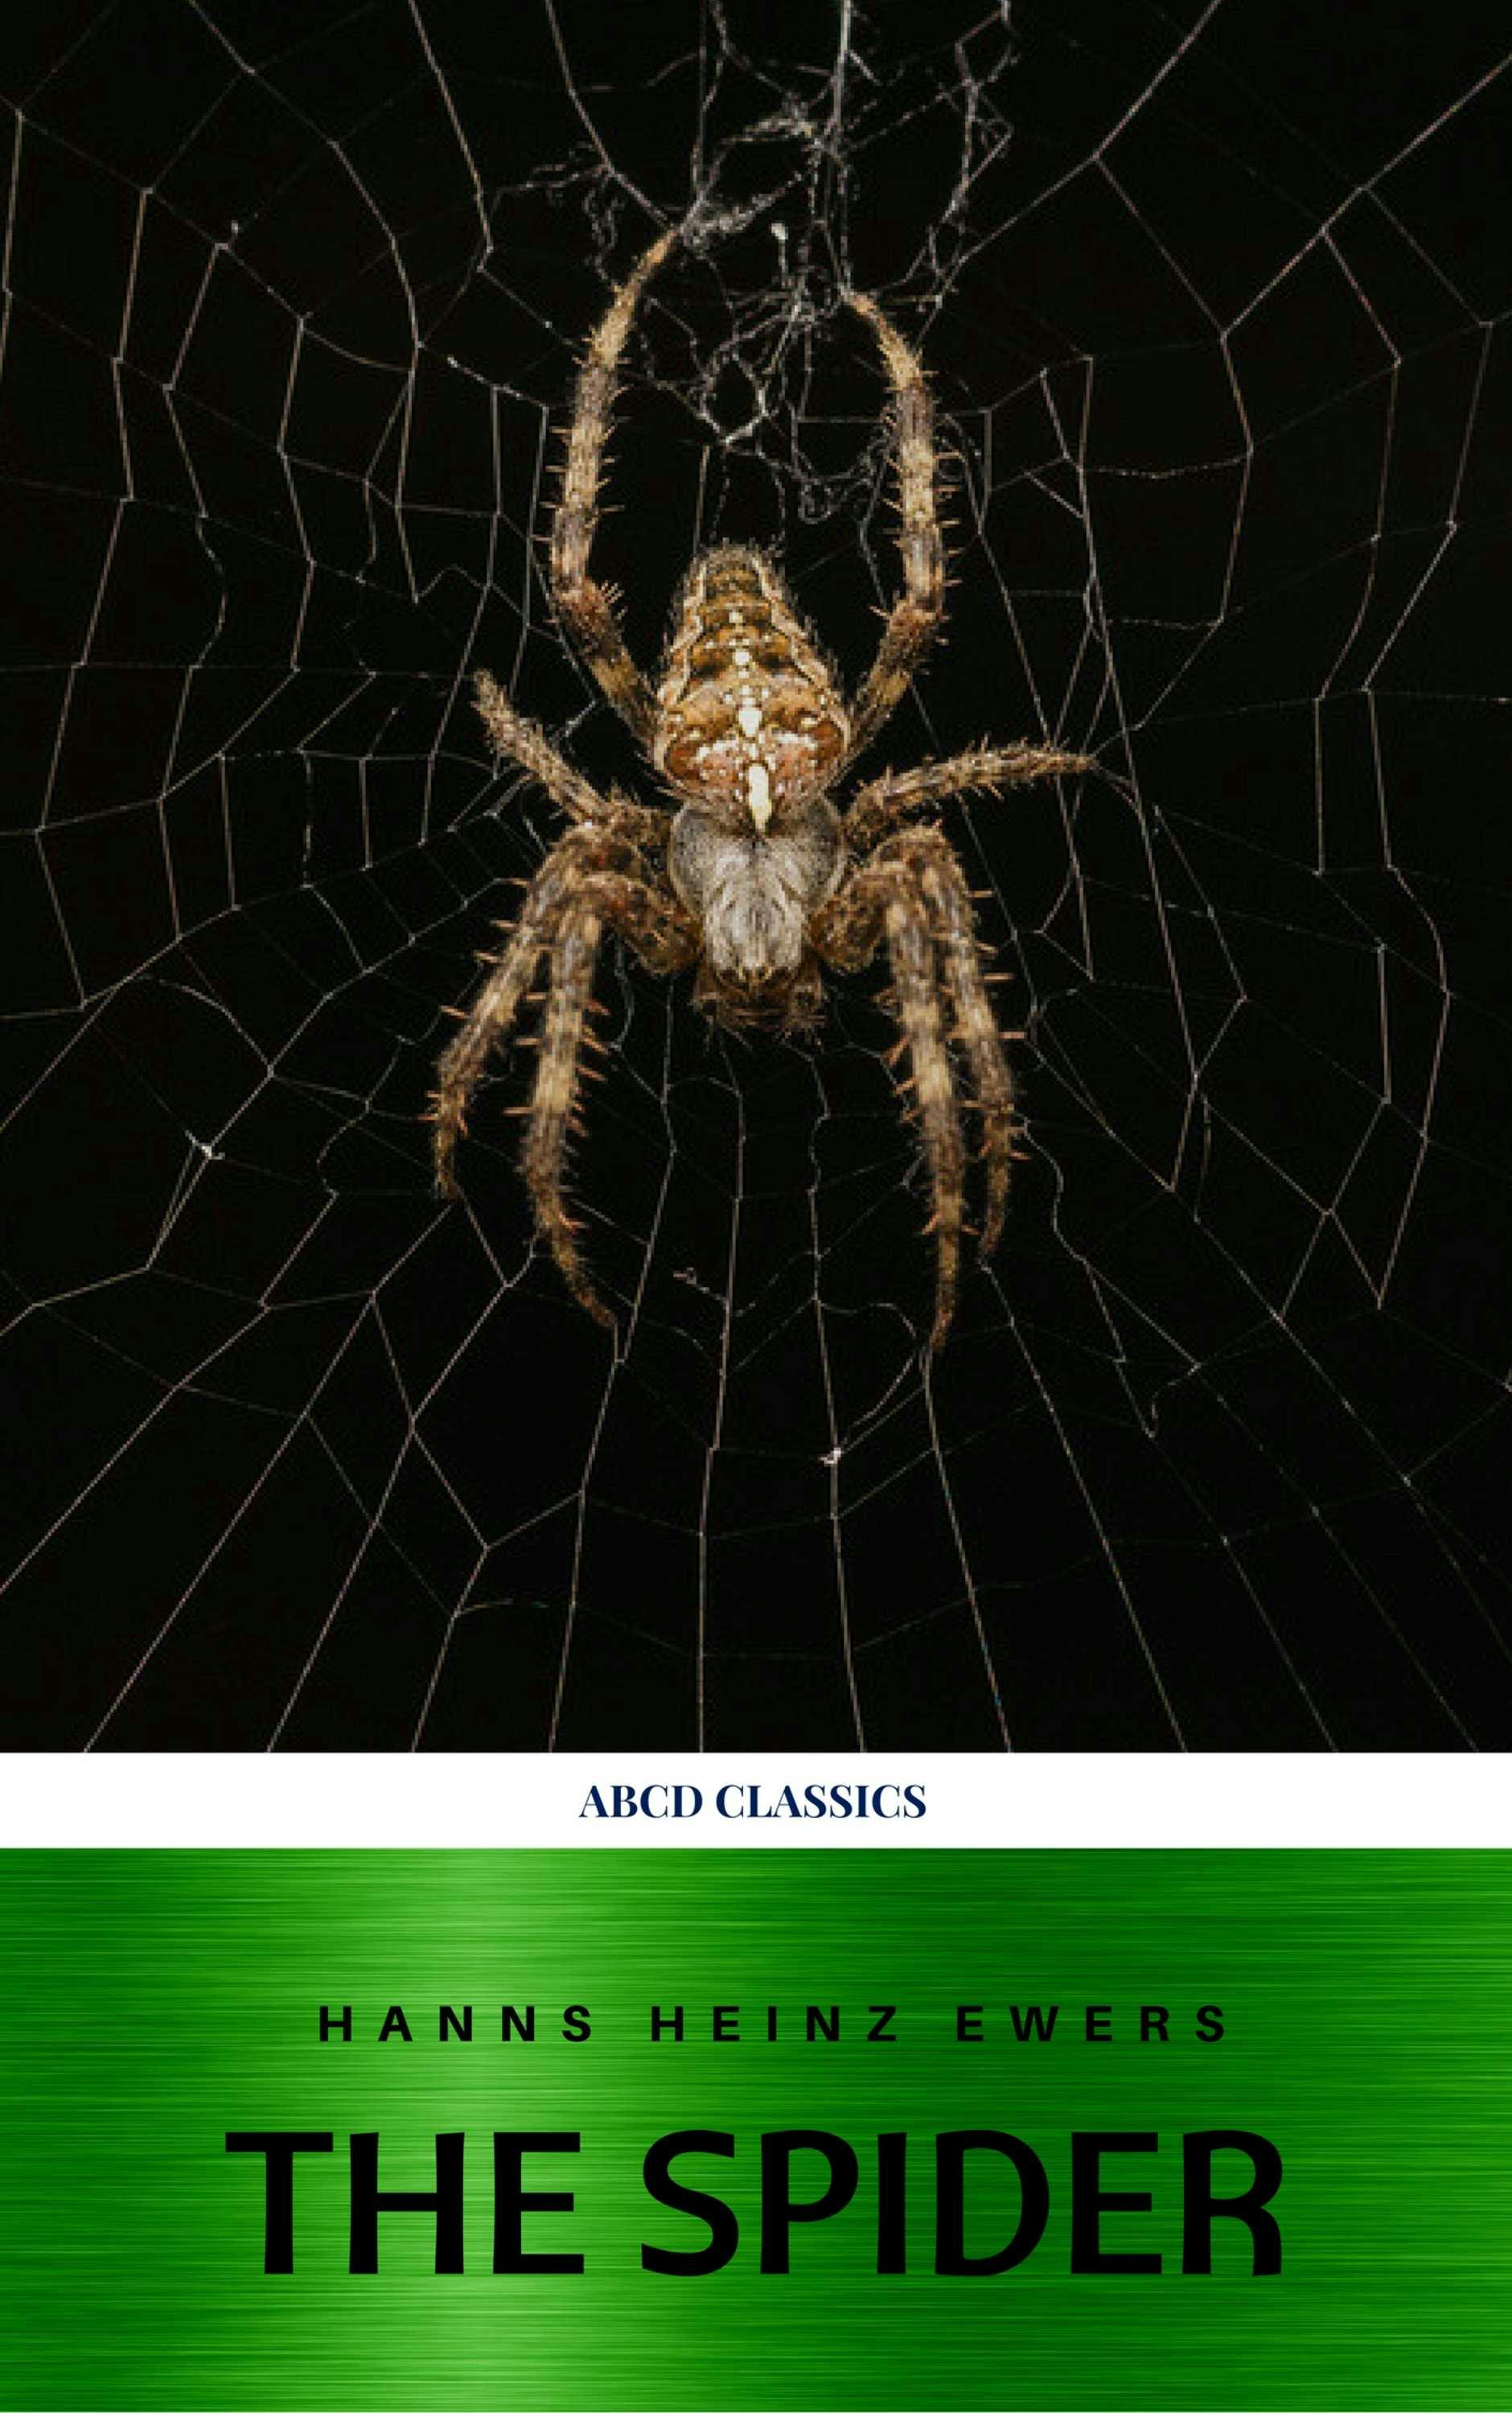 The Spider - Hanns Heinz Ewers, ABCD Classics